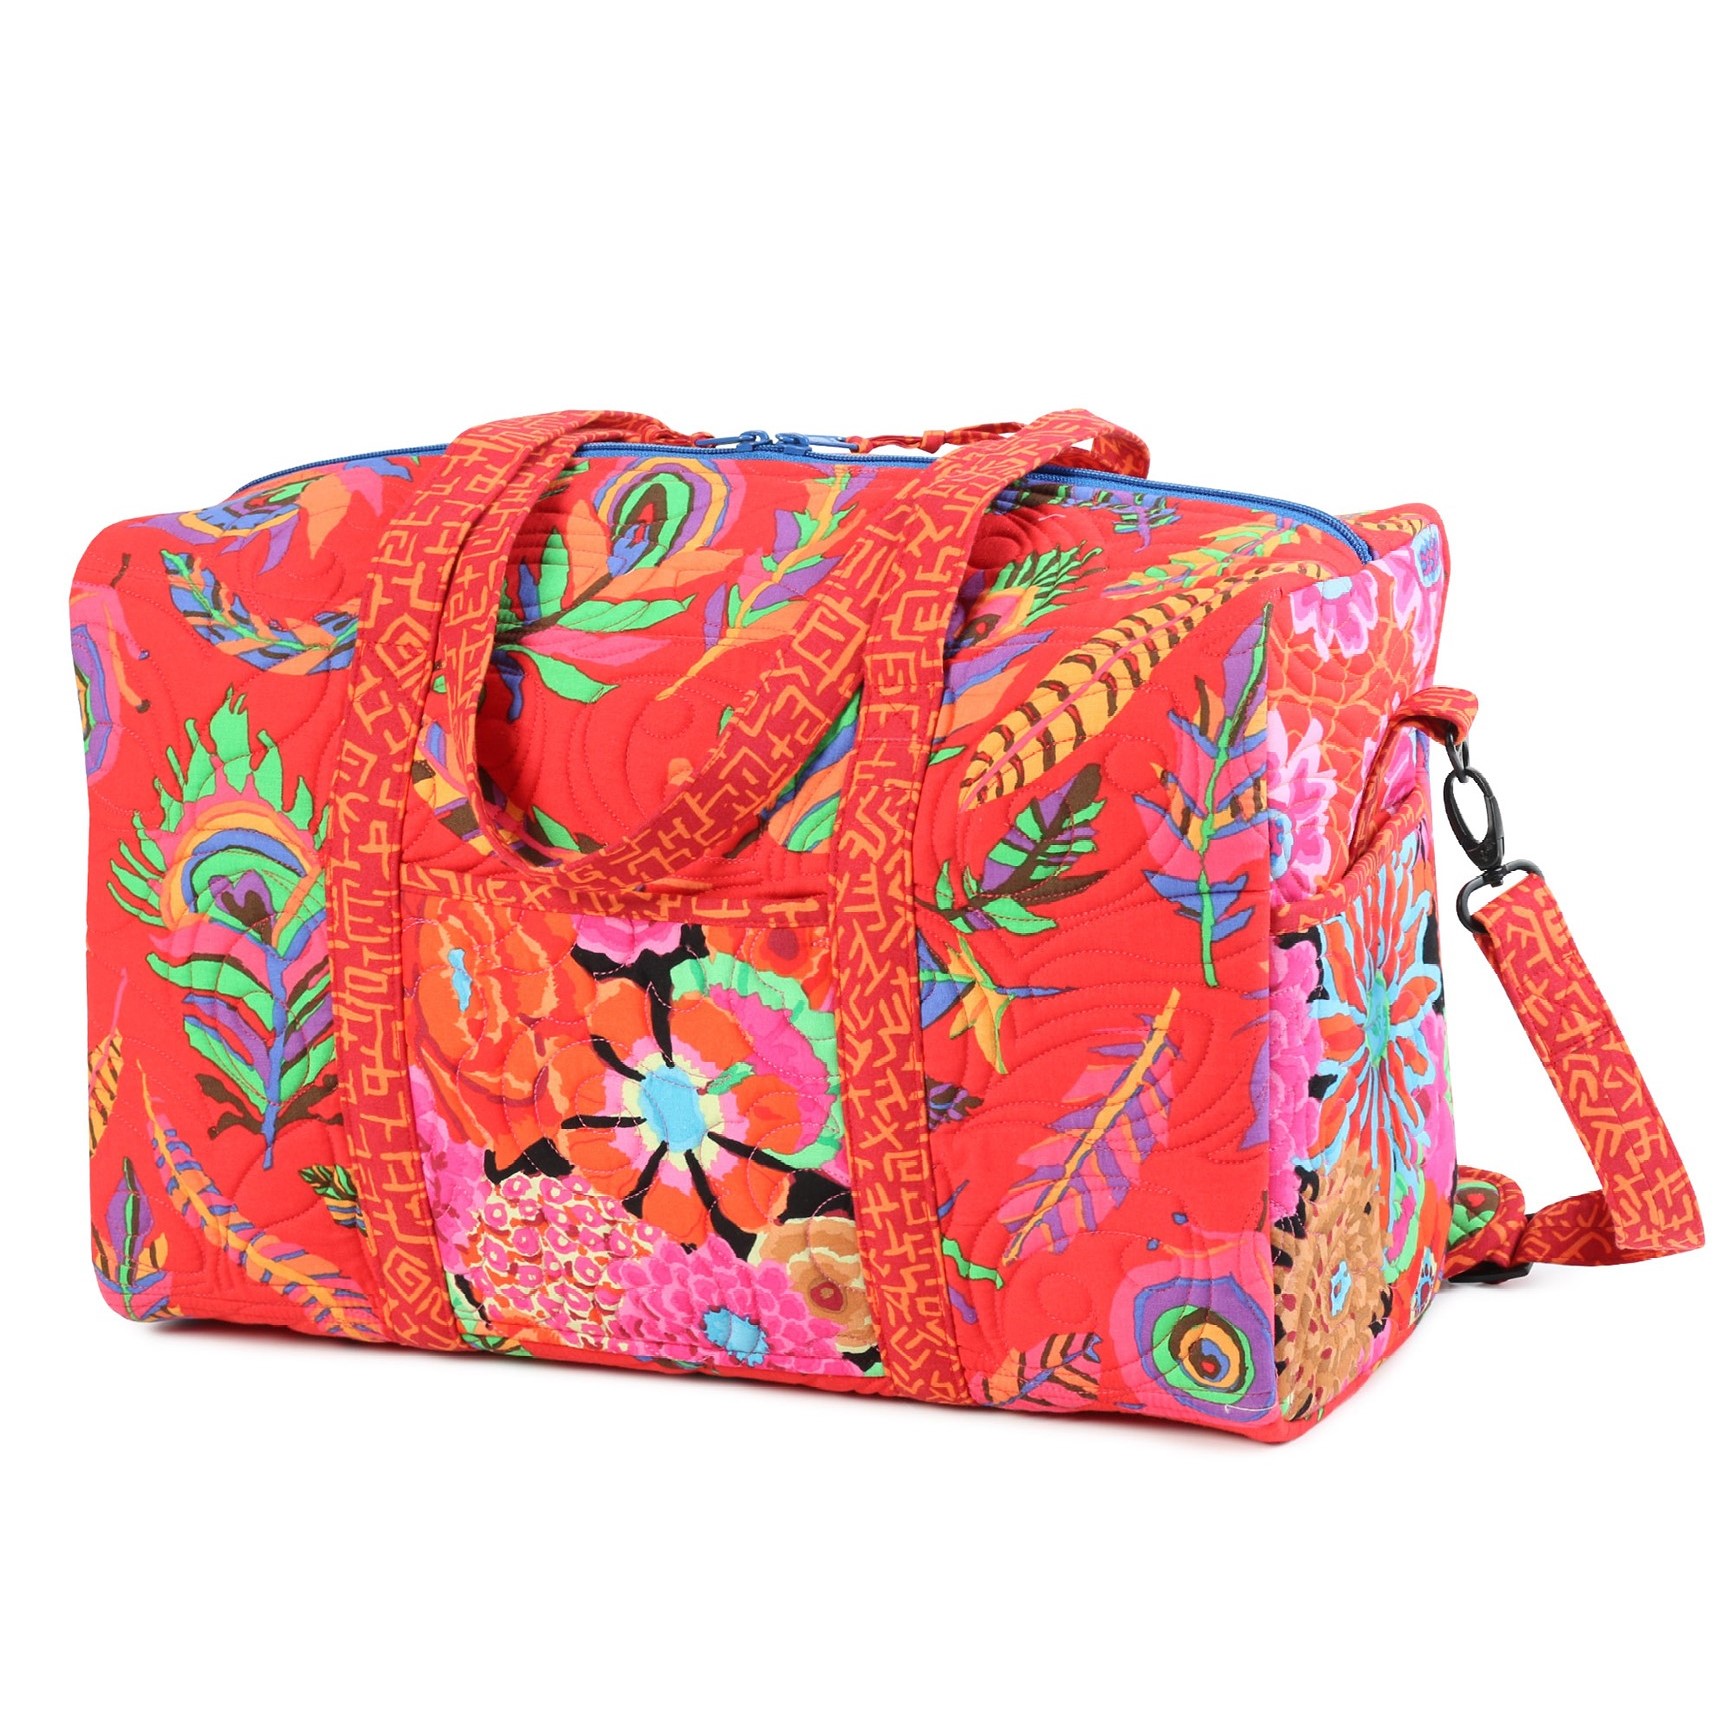 Patterns by Annie - Travel Duffle Bag 2.1